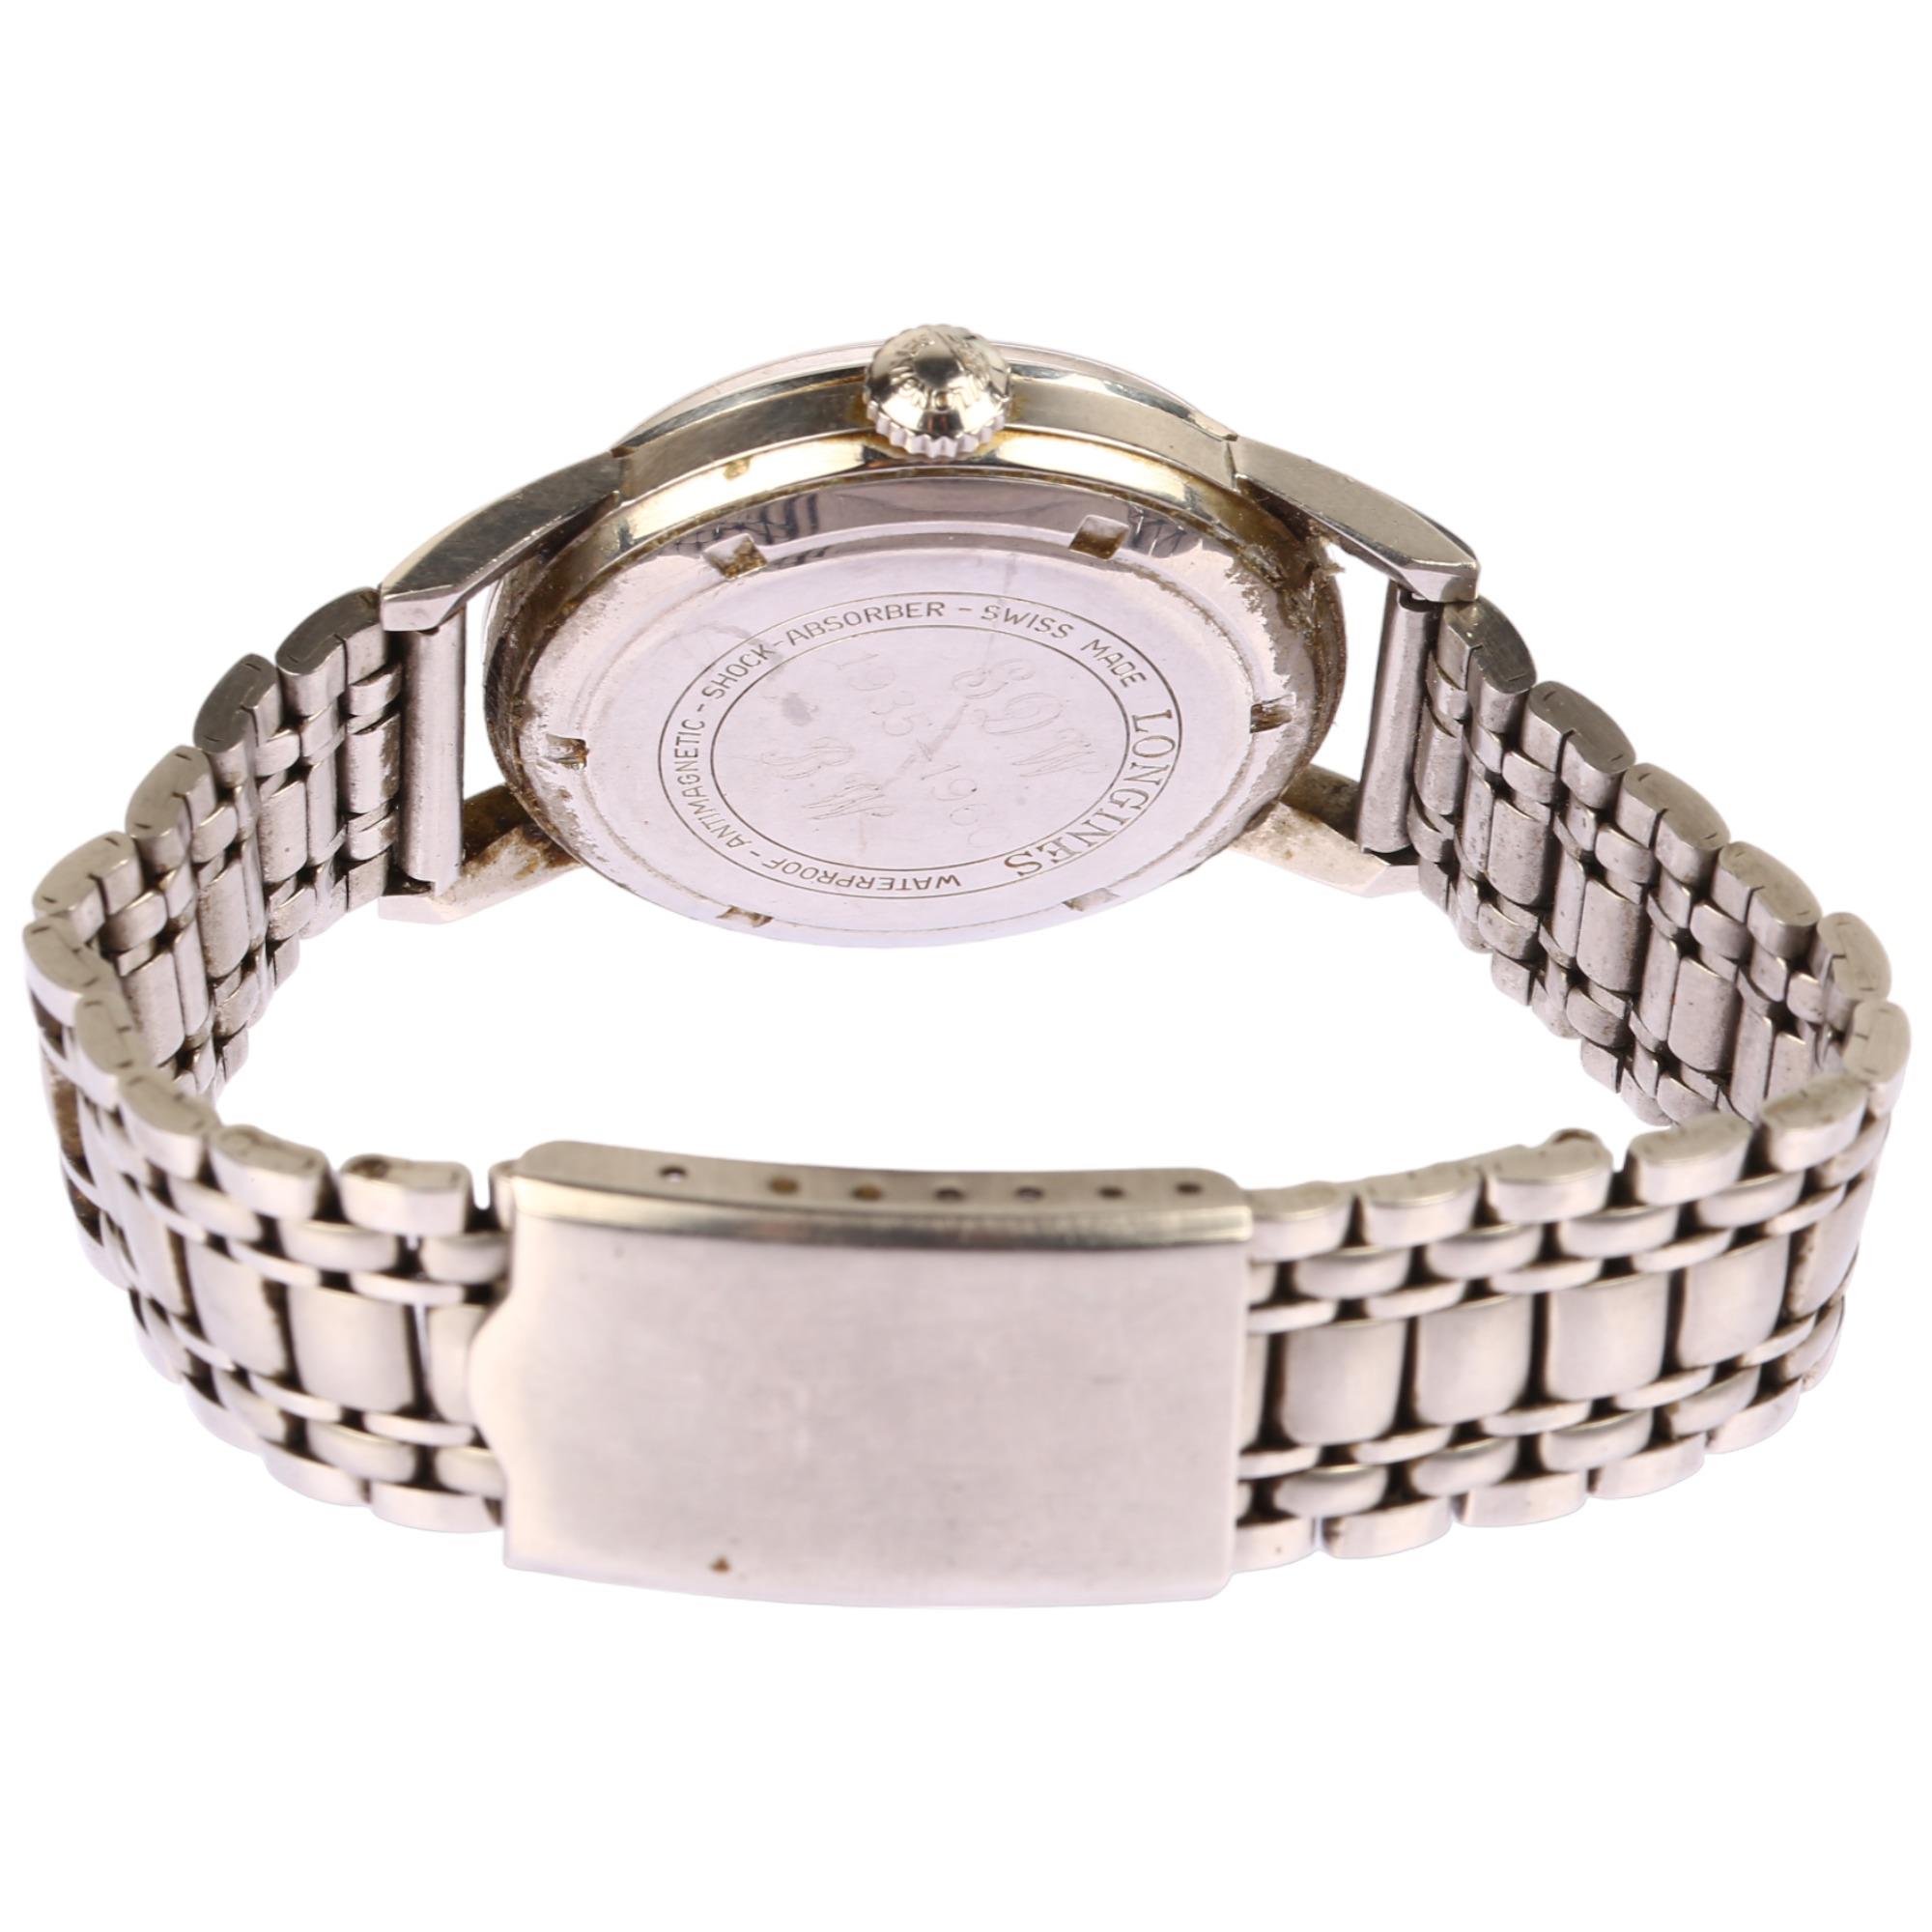 LONGINES - a Vintage stainless steel mechanical bracelet watch, circa 1960s, silvered dial with - Image 3 of 5